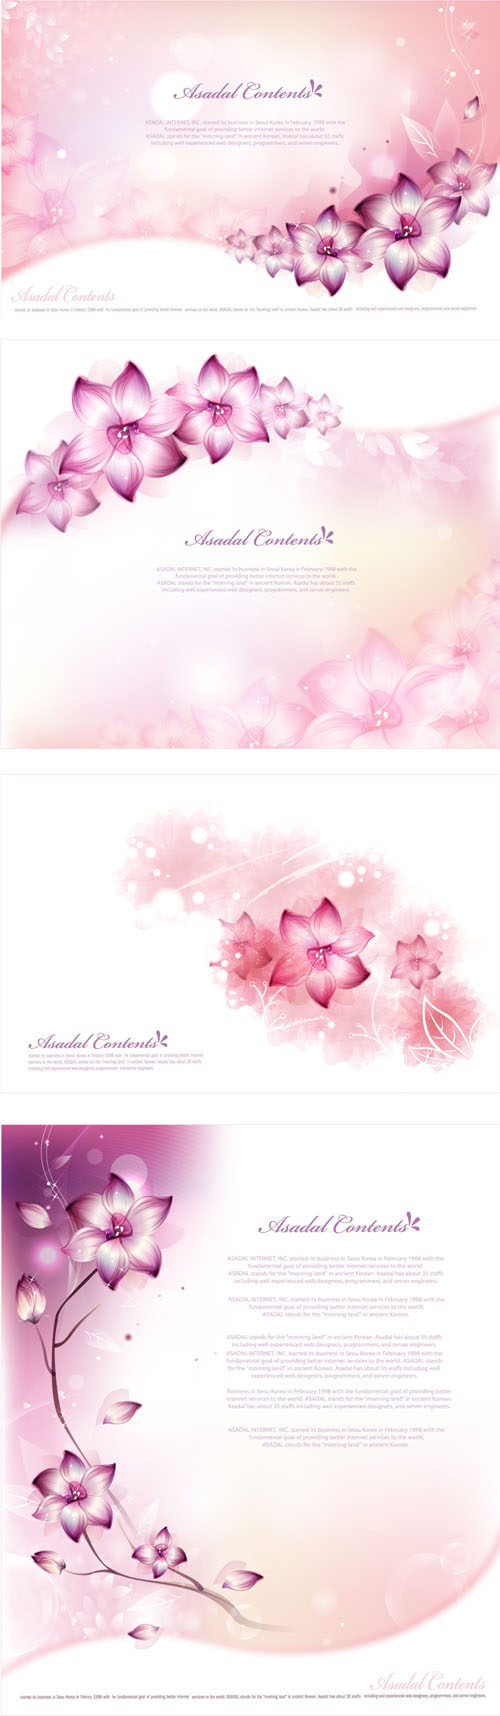 Brilliant flowers background material vector 04 flowers flower brilliant background material background   